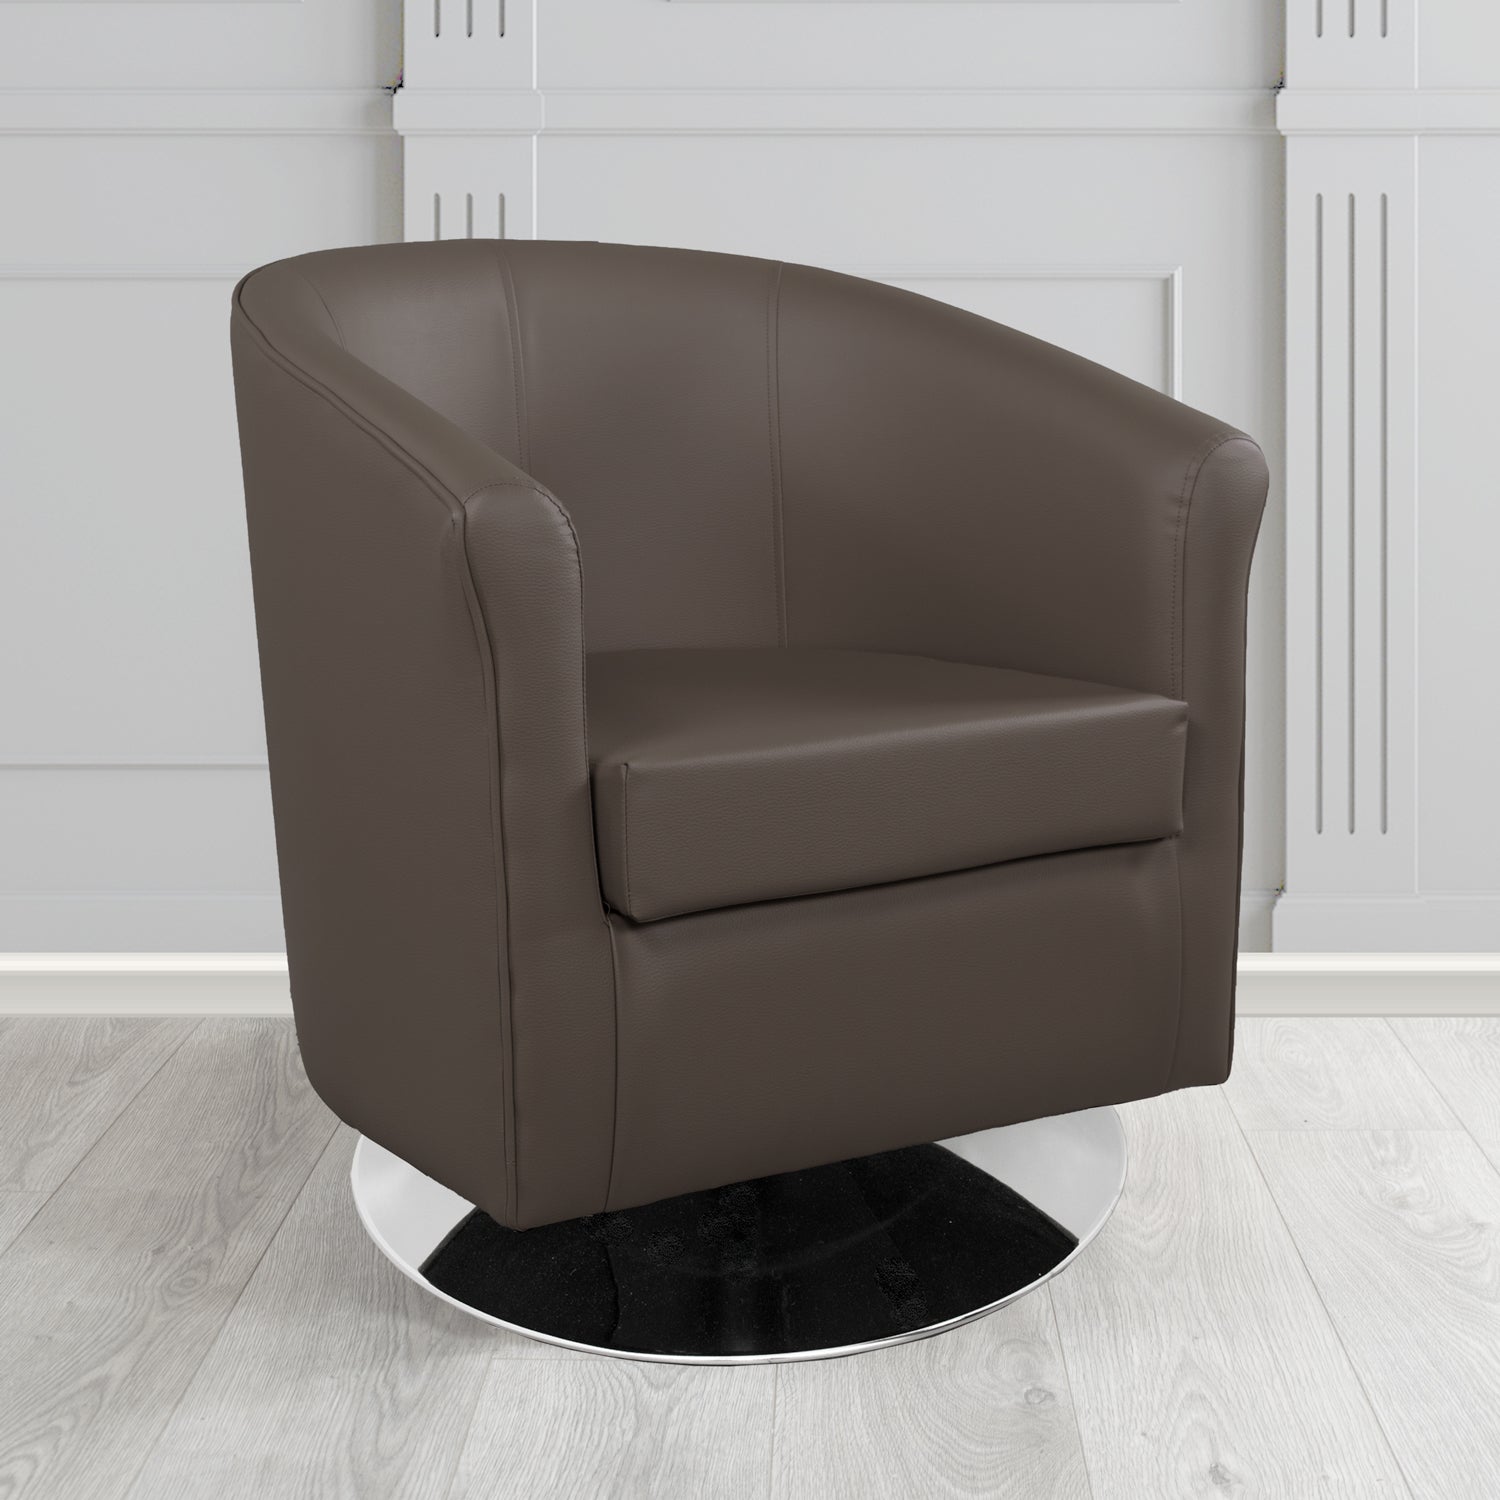 Tuscany Swivel Tub Chair in Madrid Chocolate Faux Leather - The Tub Chair Shop